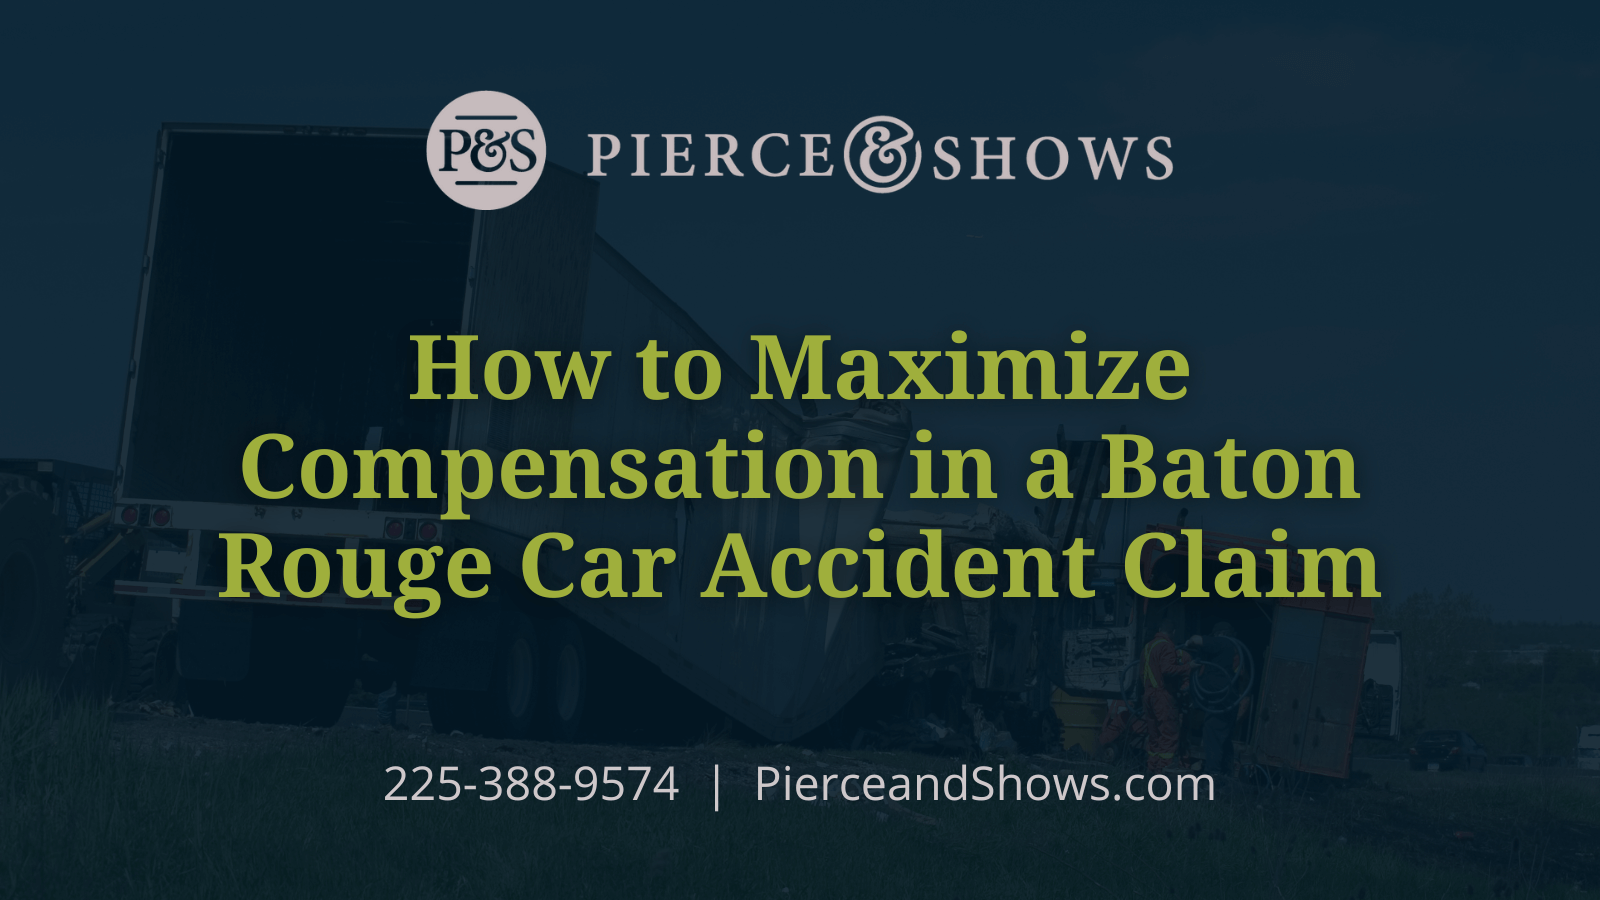 How to Maximize Compensation in a Baton Rouge Car Accident Claim - Baton Rouge Louisiana injury attorney Pierce & Shows